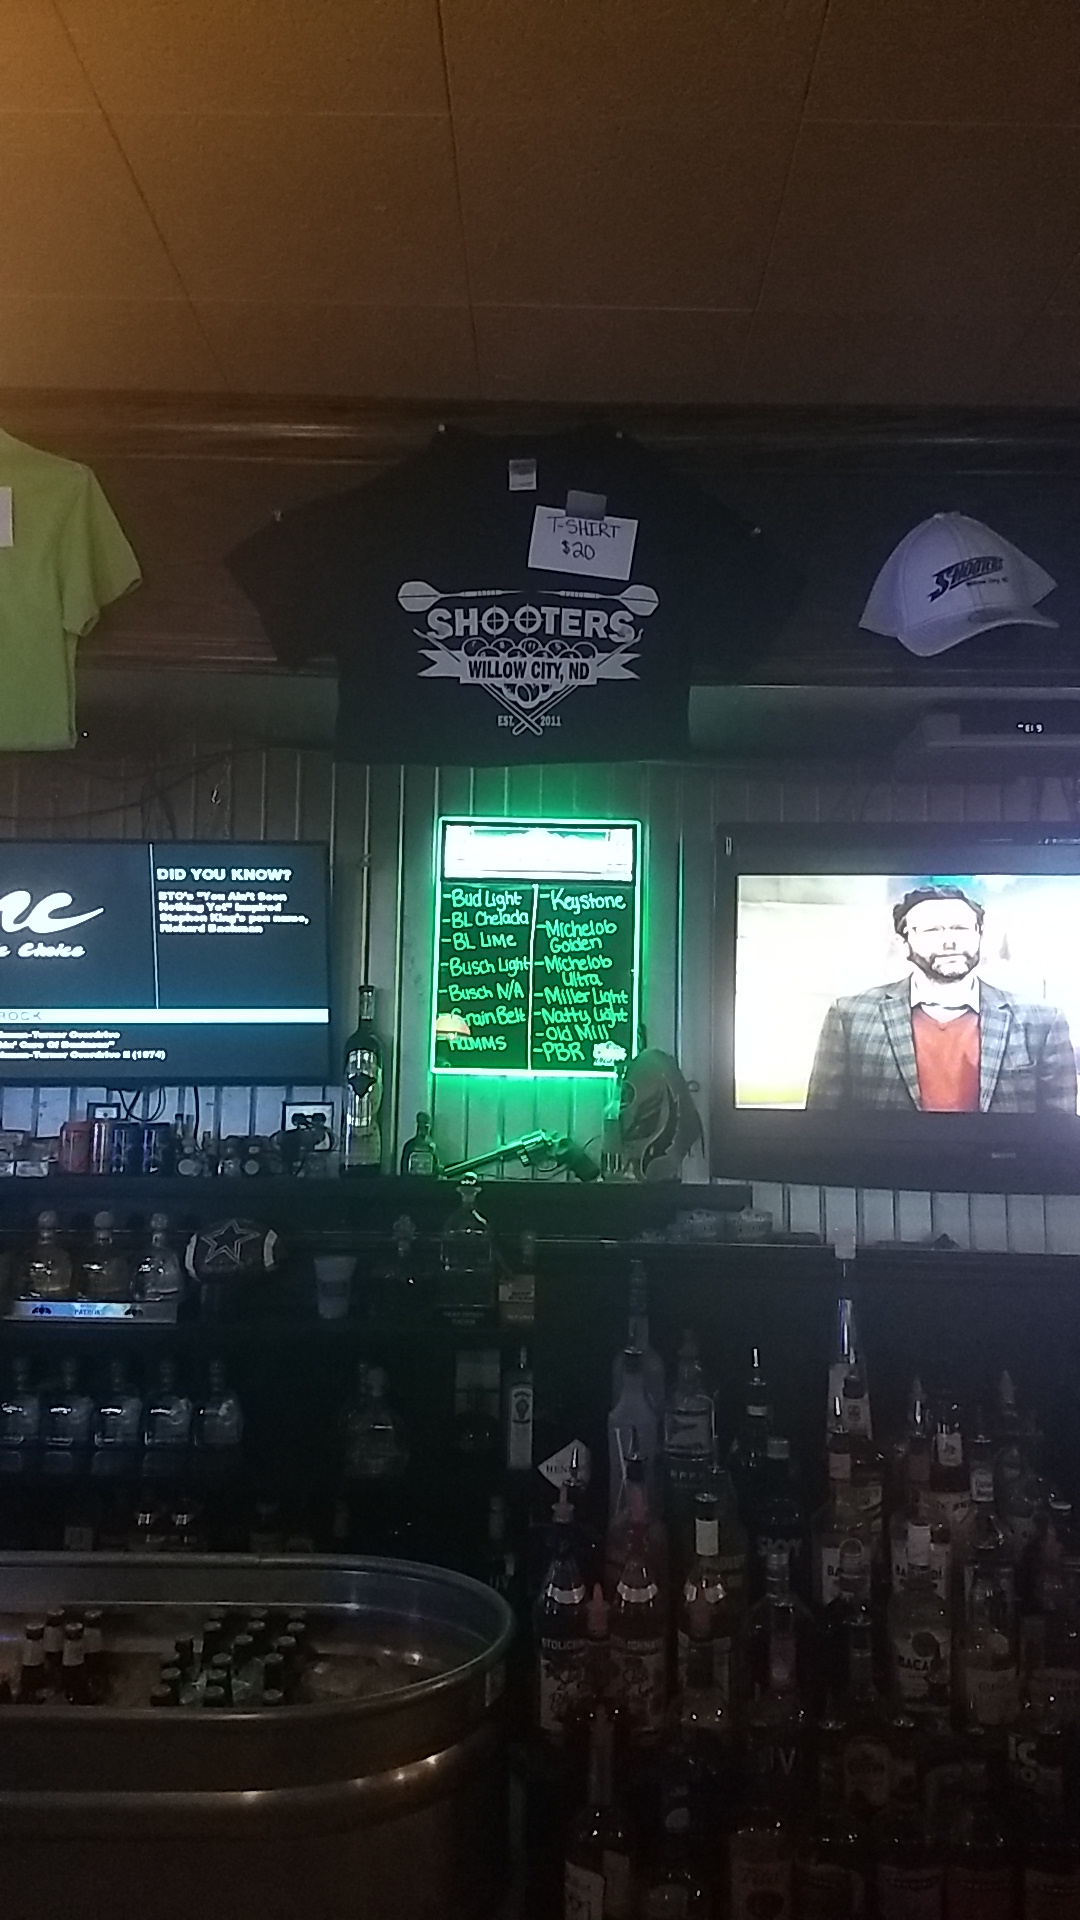 Shooters 229 Main St, Willow City, ND 58384